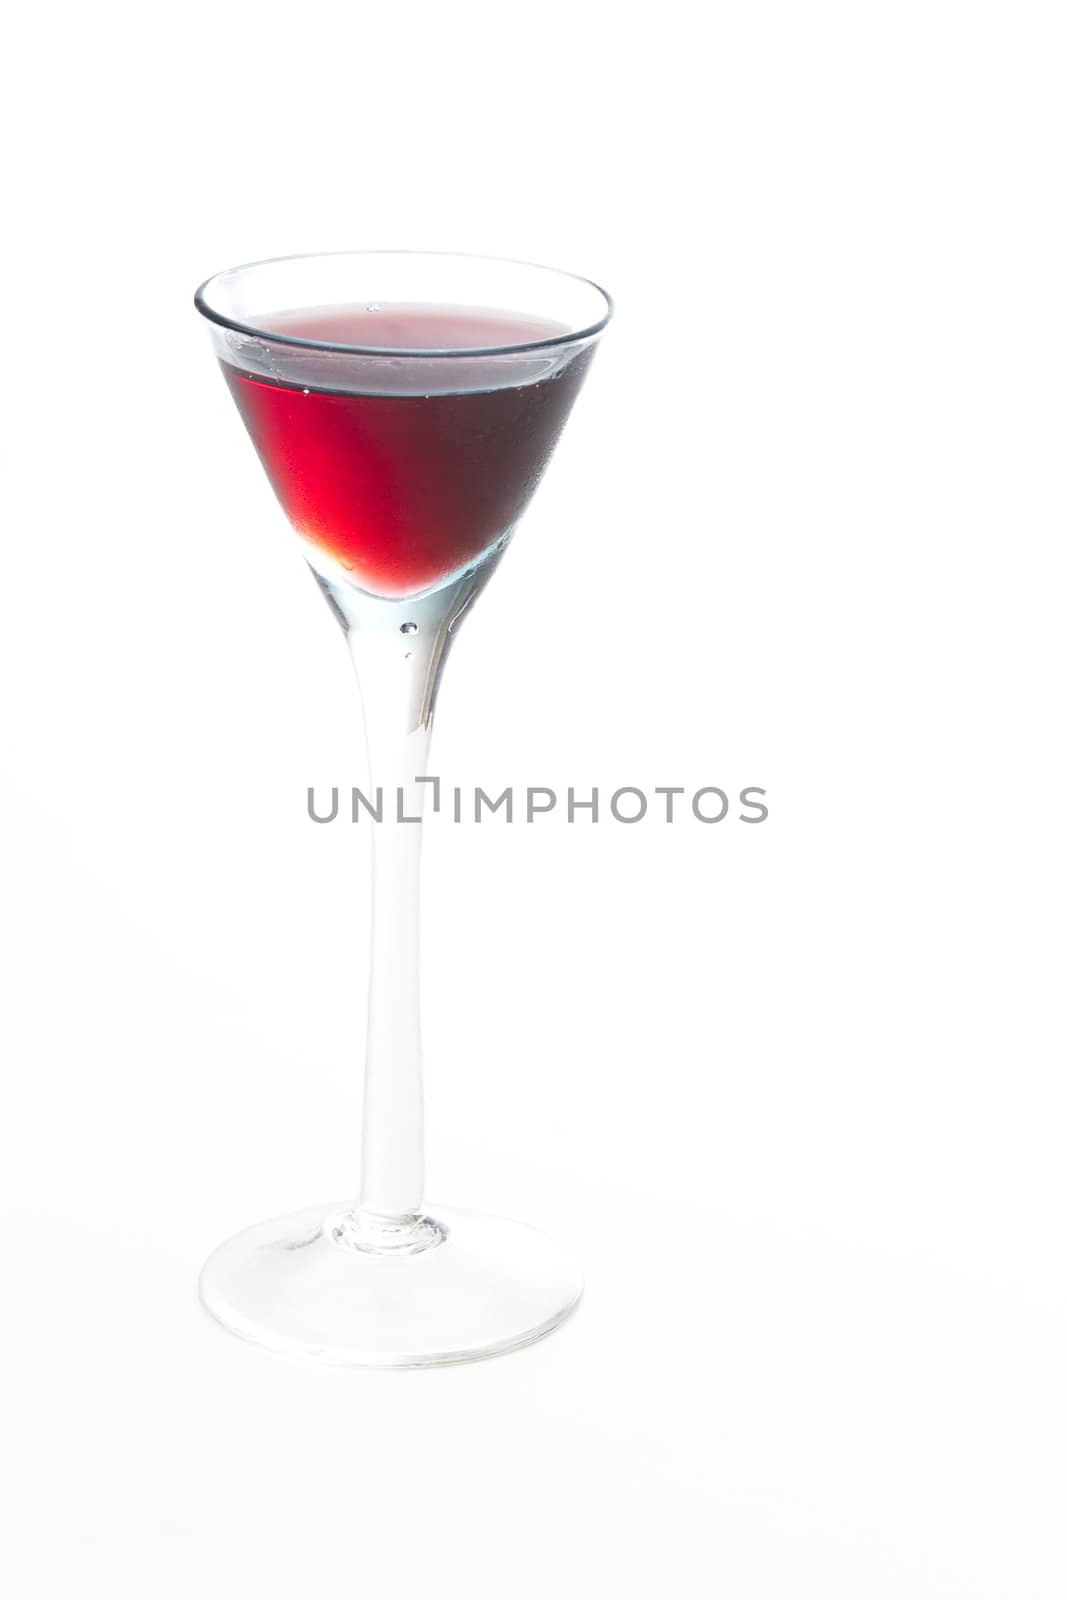 Small glass of red wine against a white background